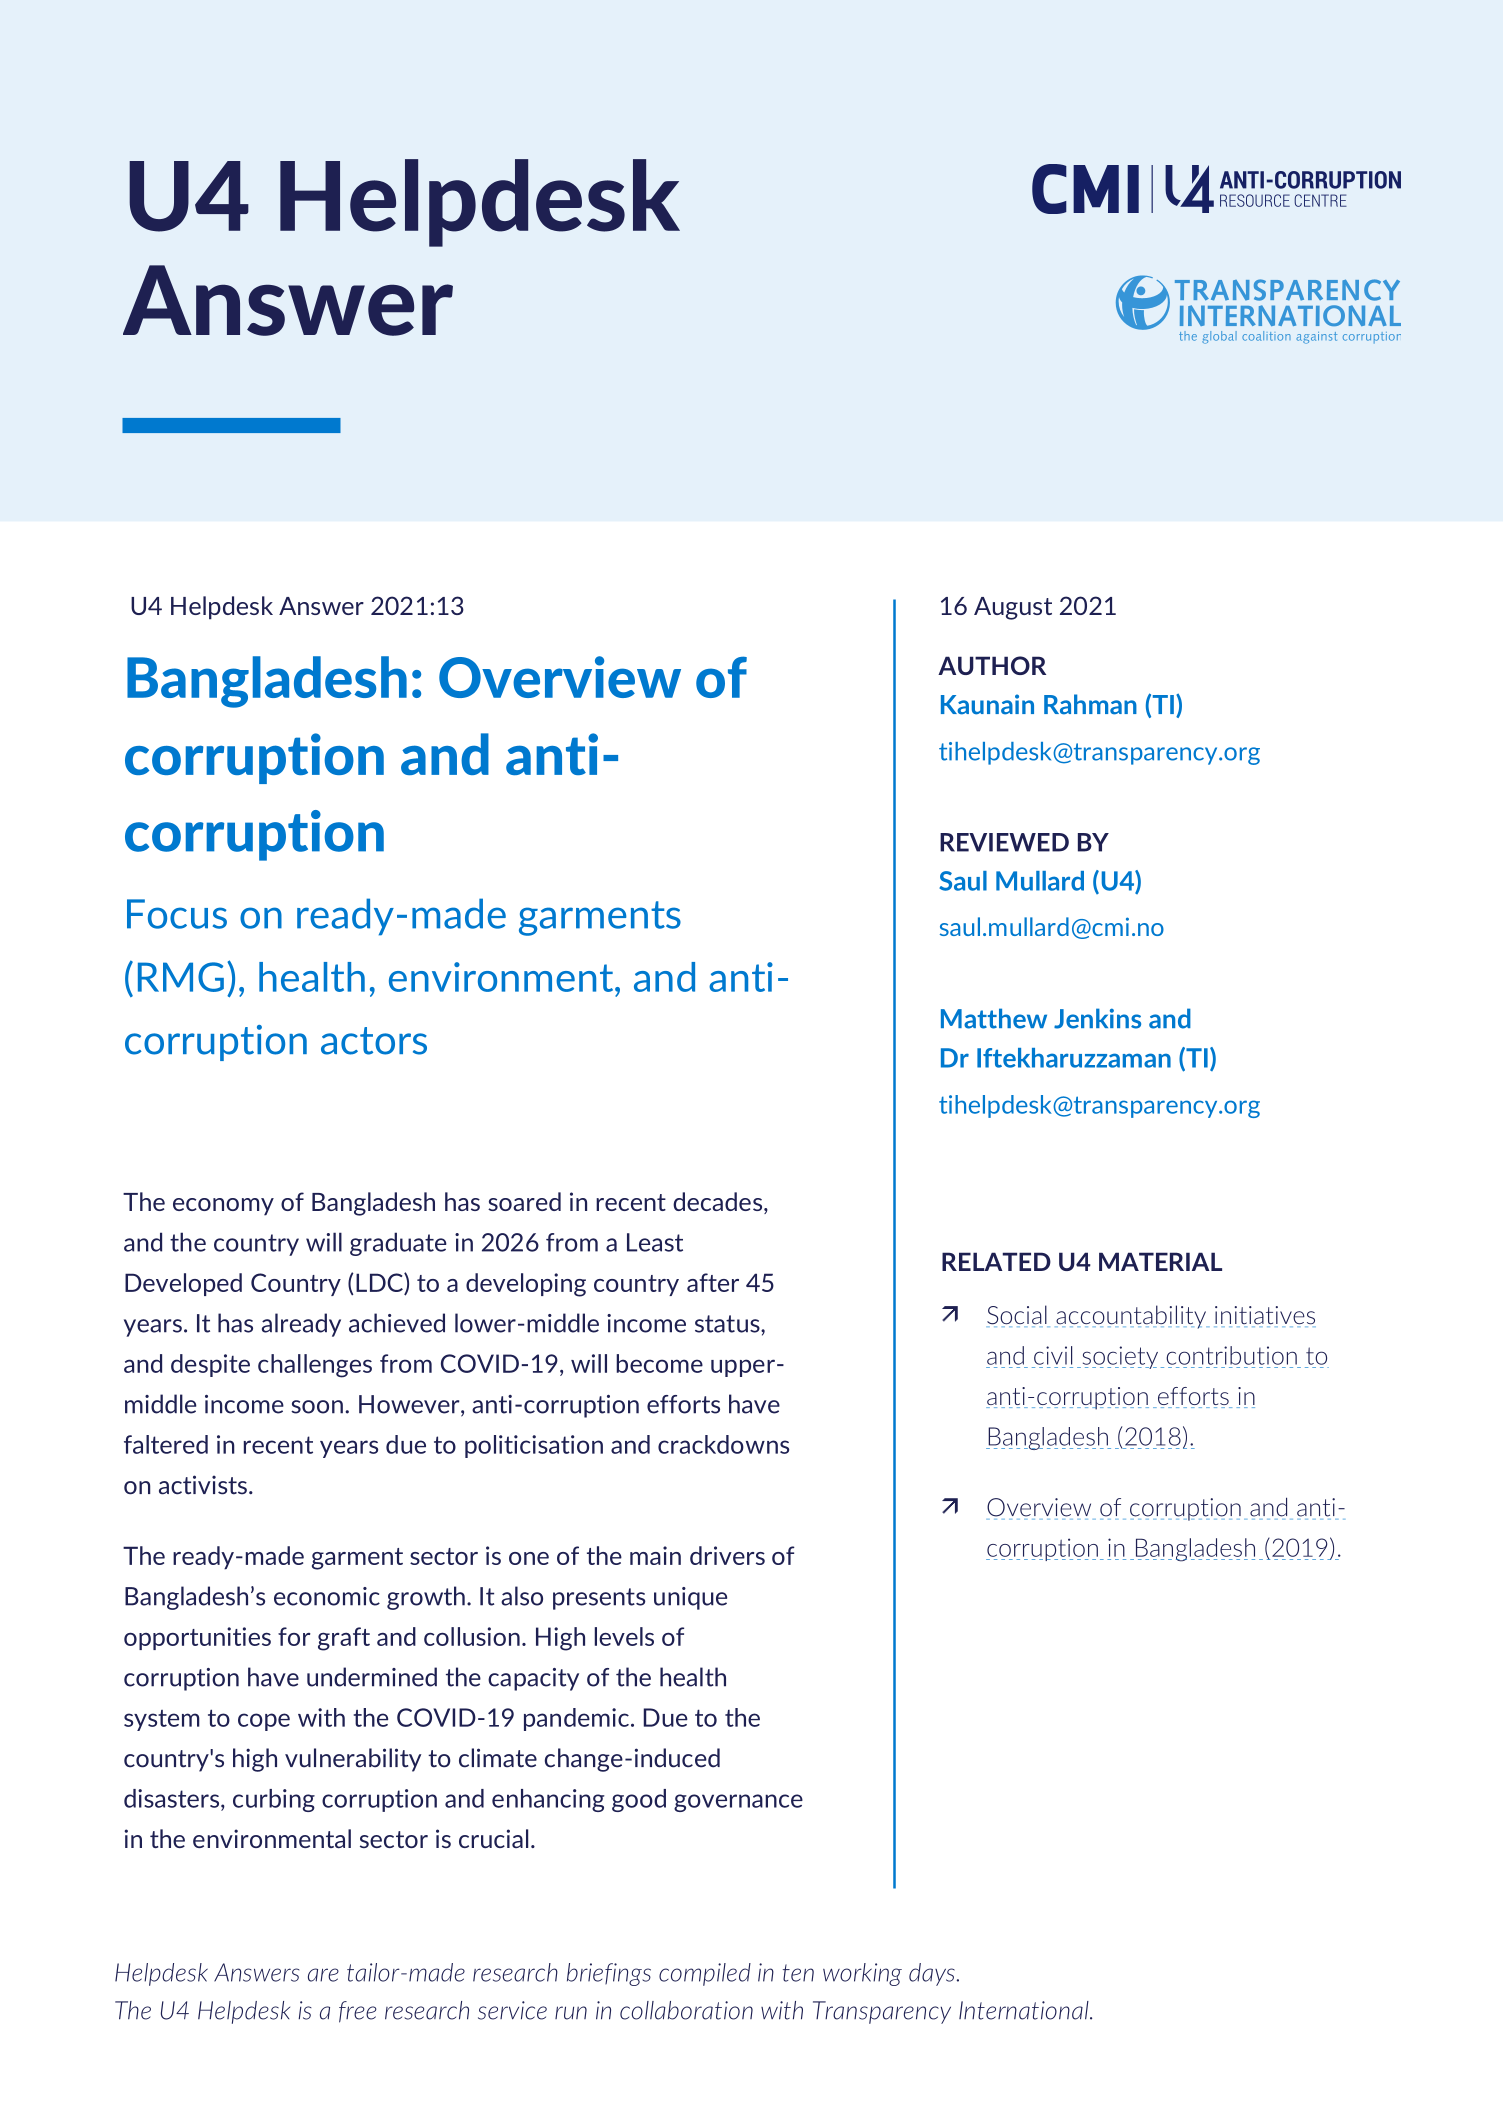 Bangladesh: Overview of corruption and anti-corruption